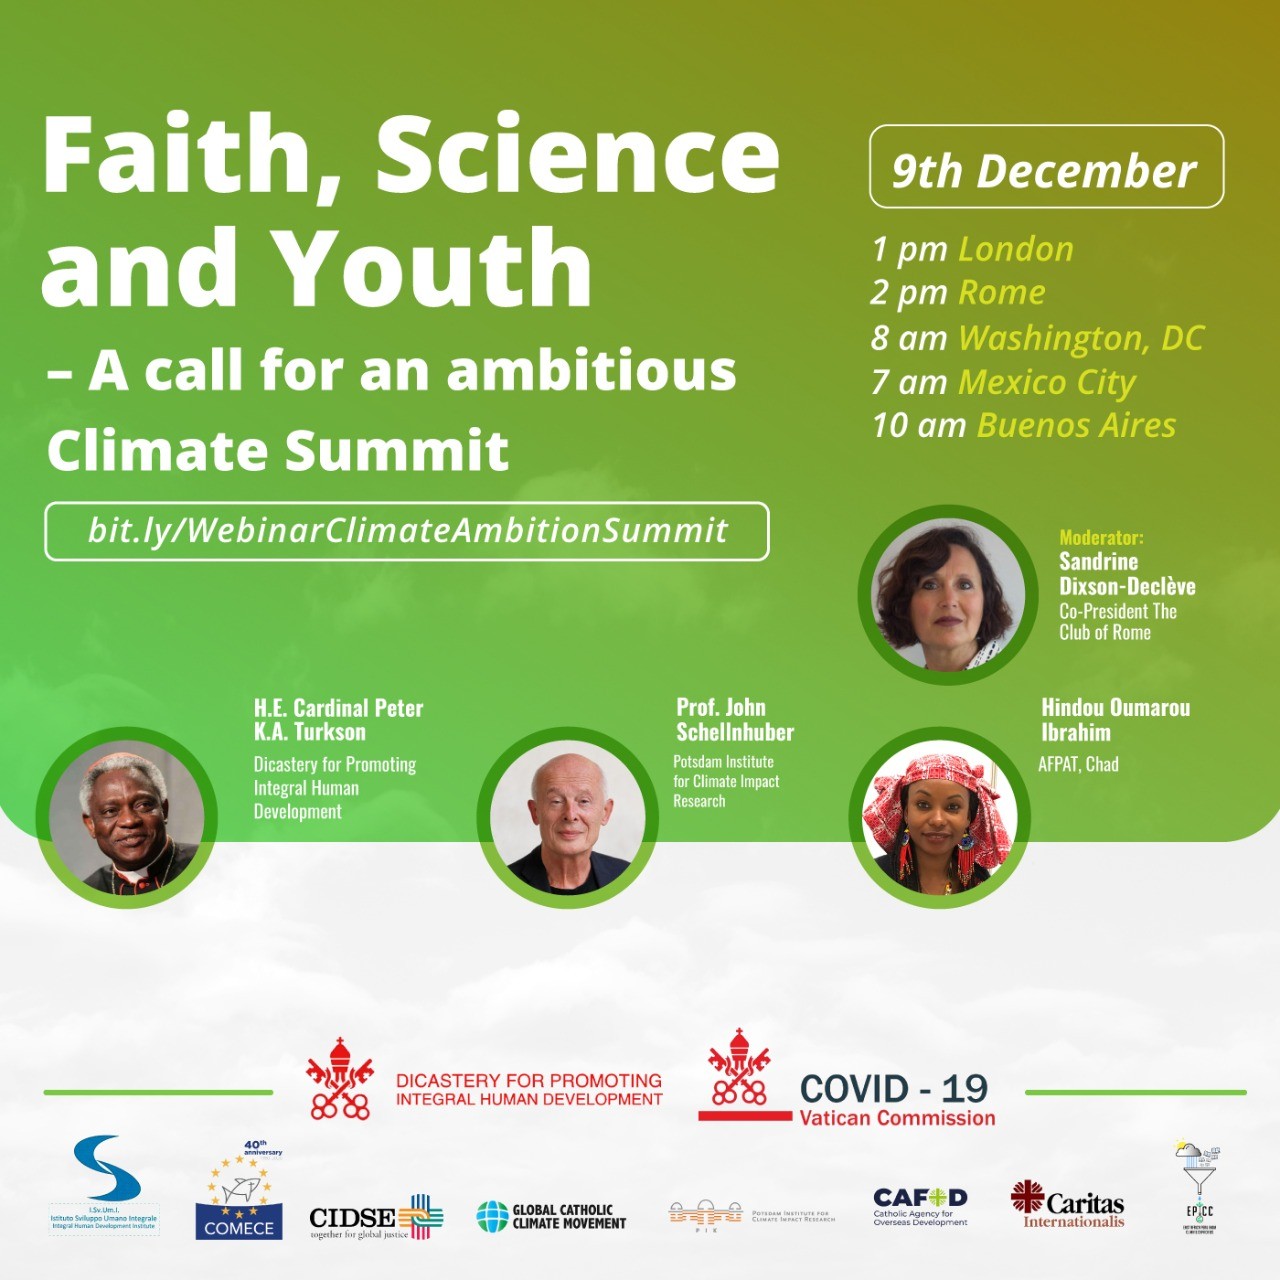 Vatican Covid-19 Commission and its partners organize a webinar uniting faith, science and youth to call for an ambitious Climate Summit 